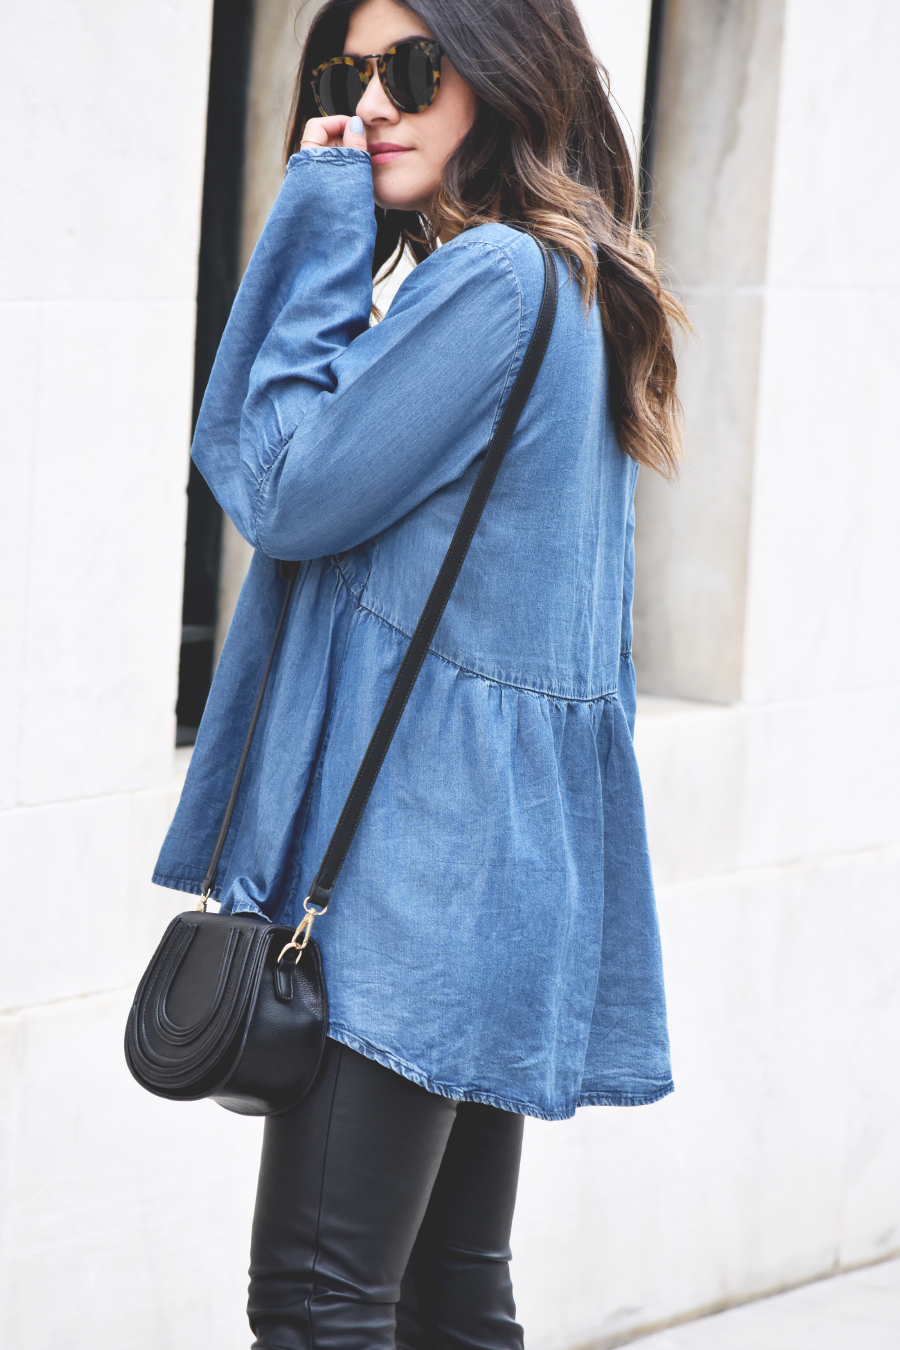 h&m denim top with bell sleeves